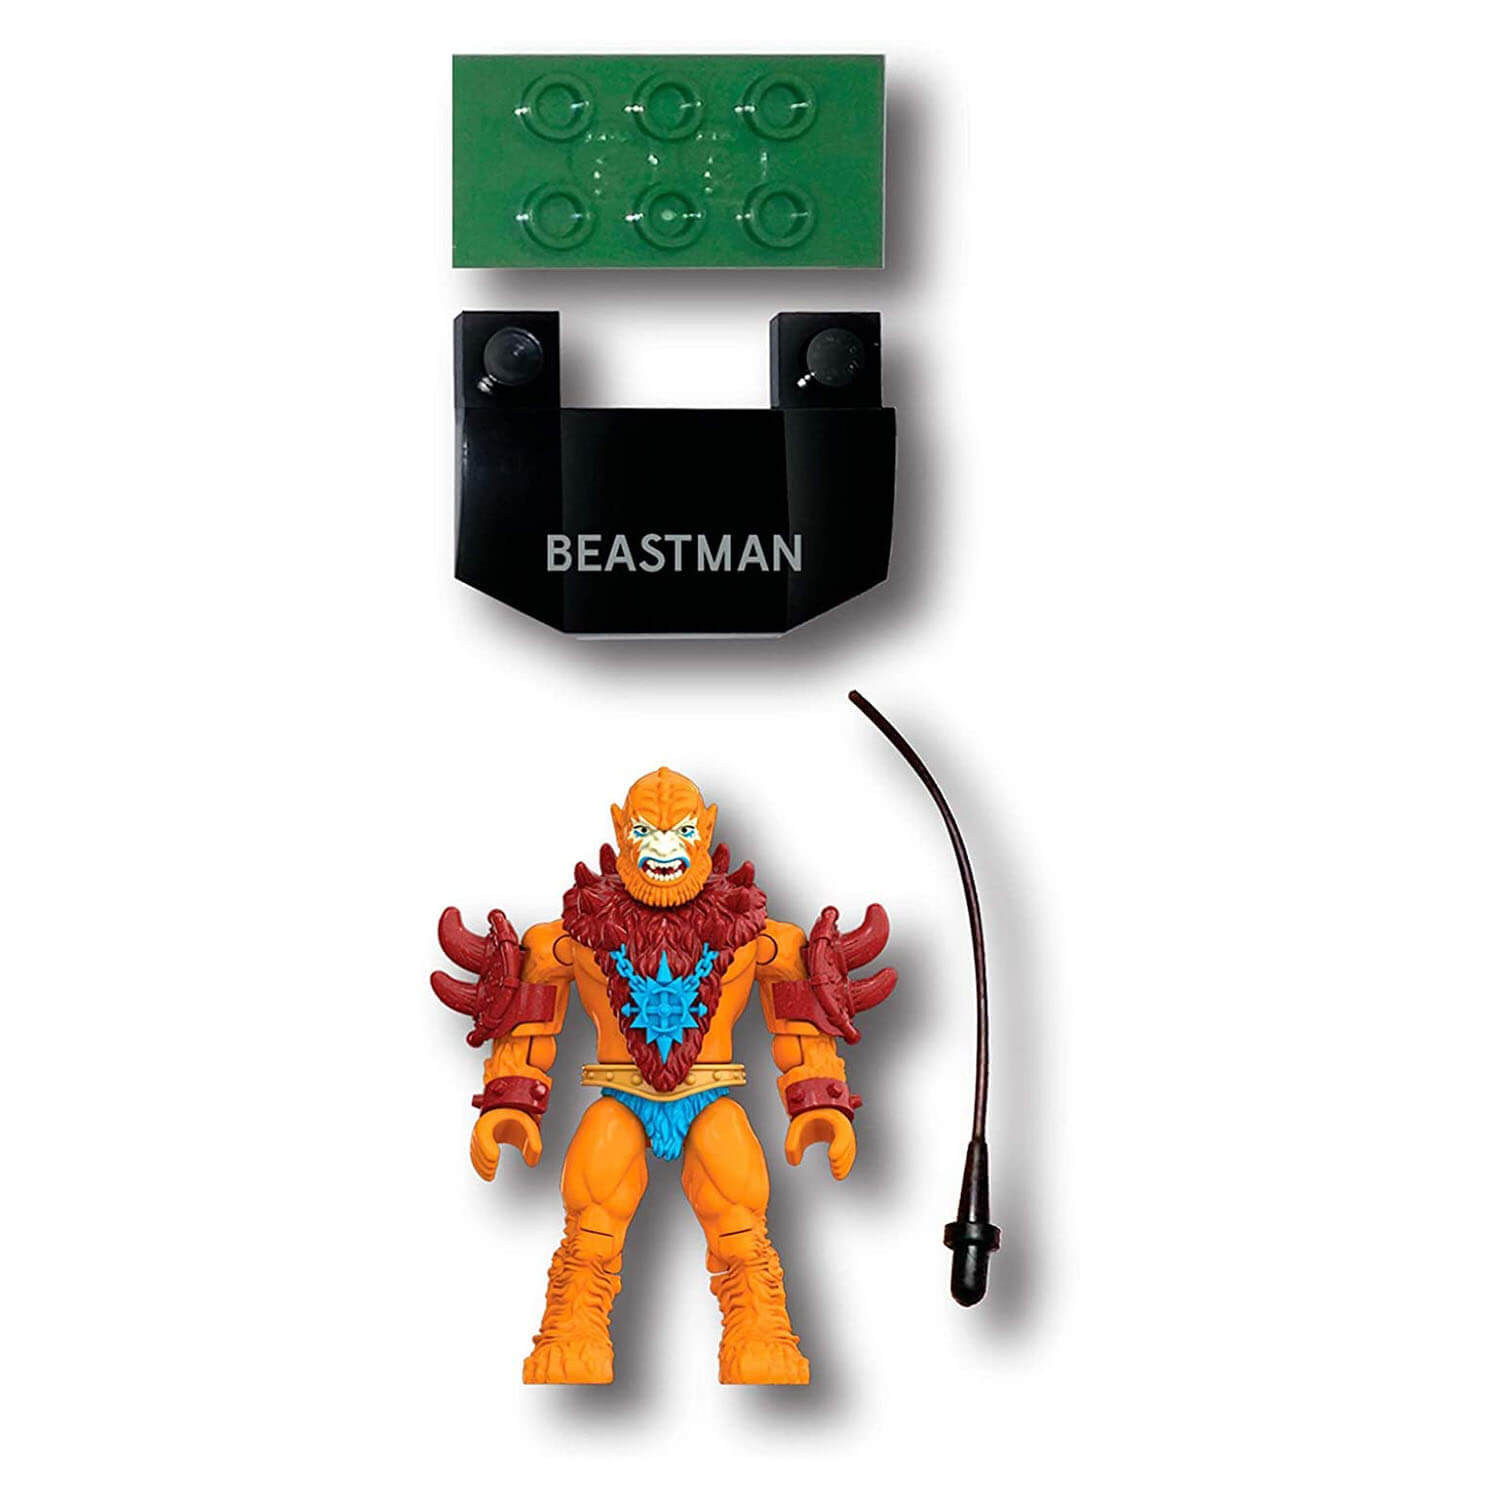 Front view of the beastman figure.